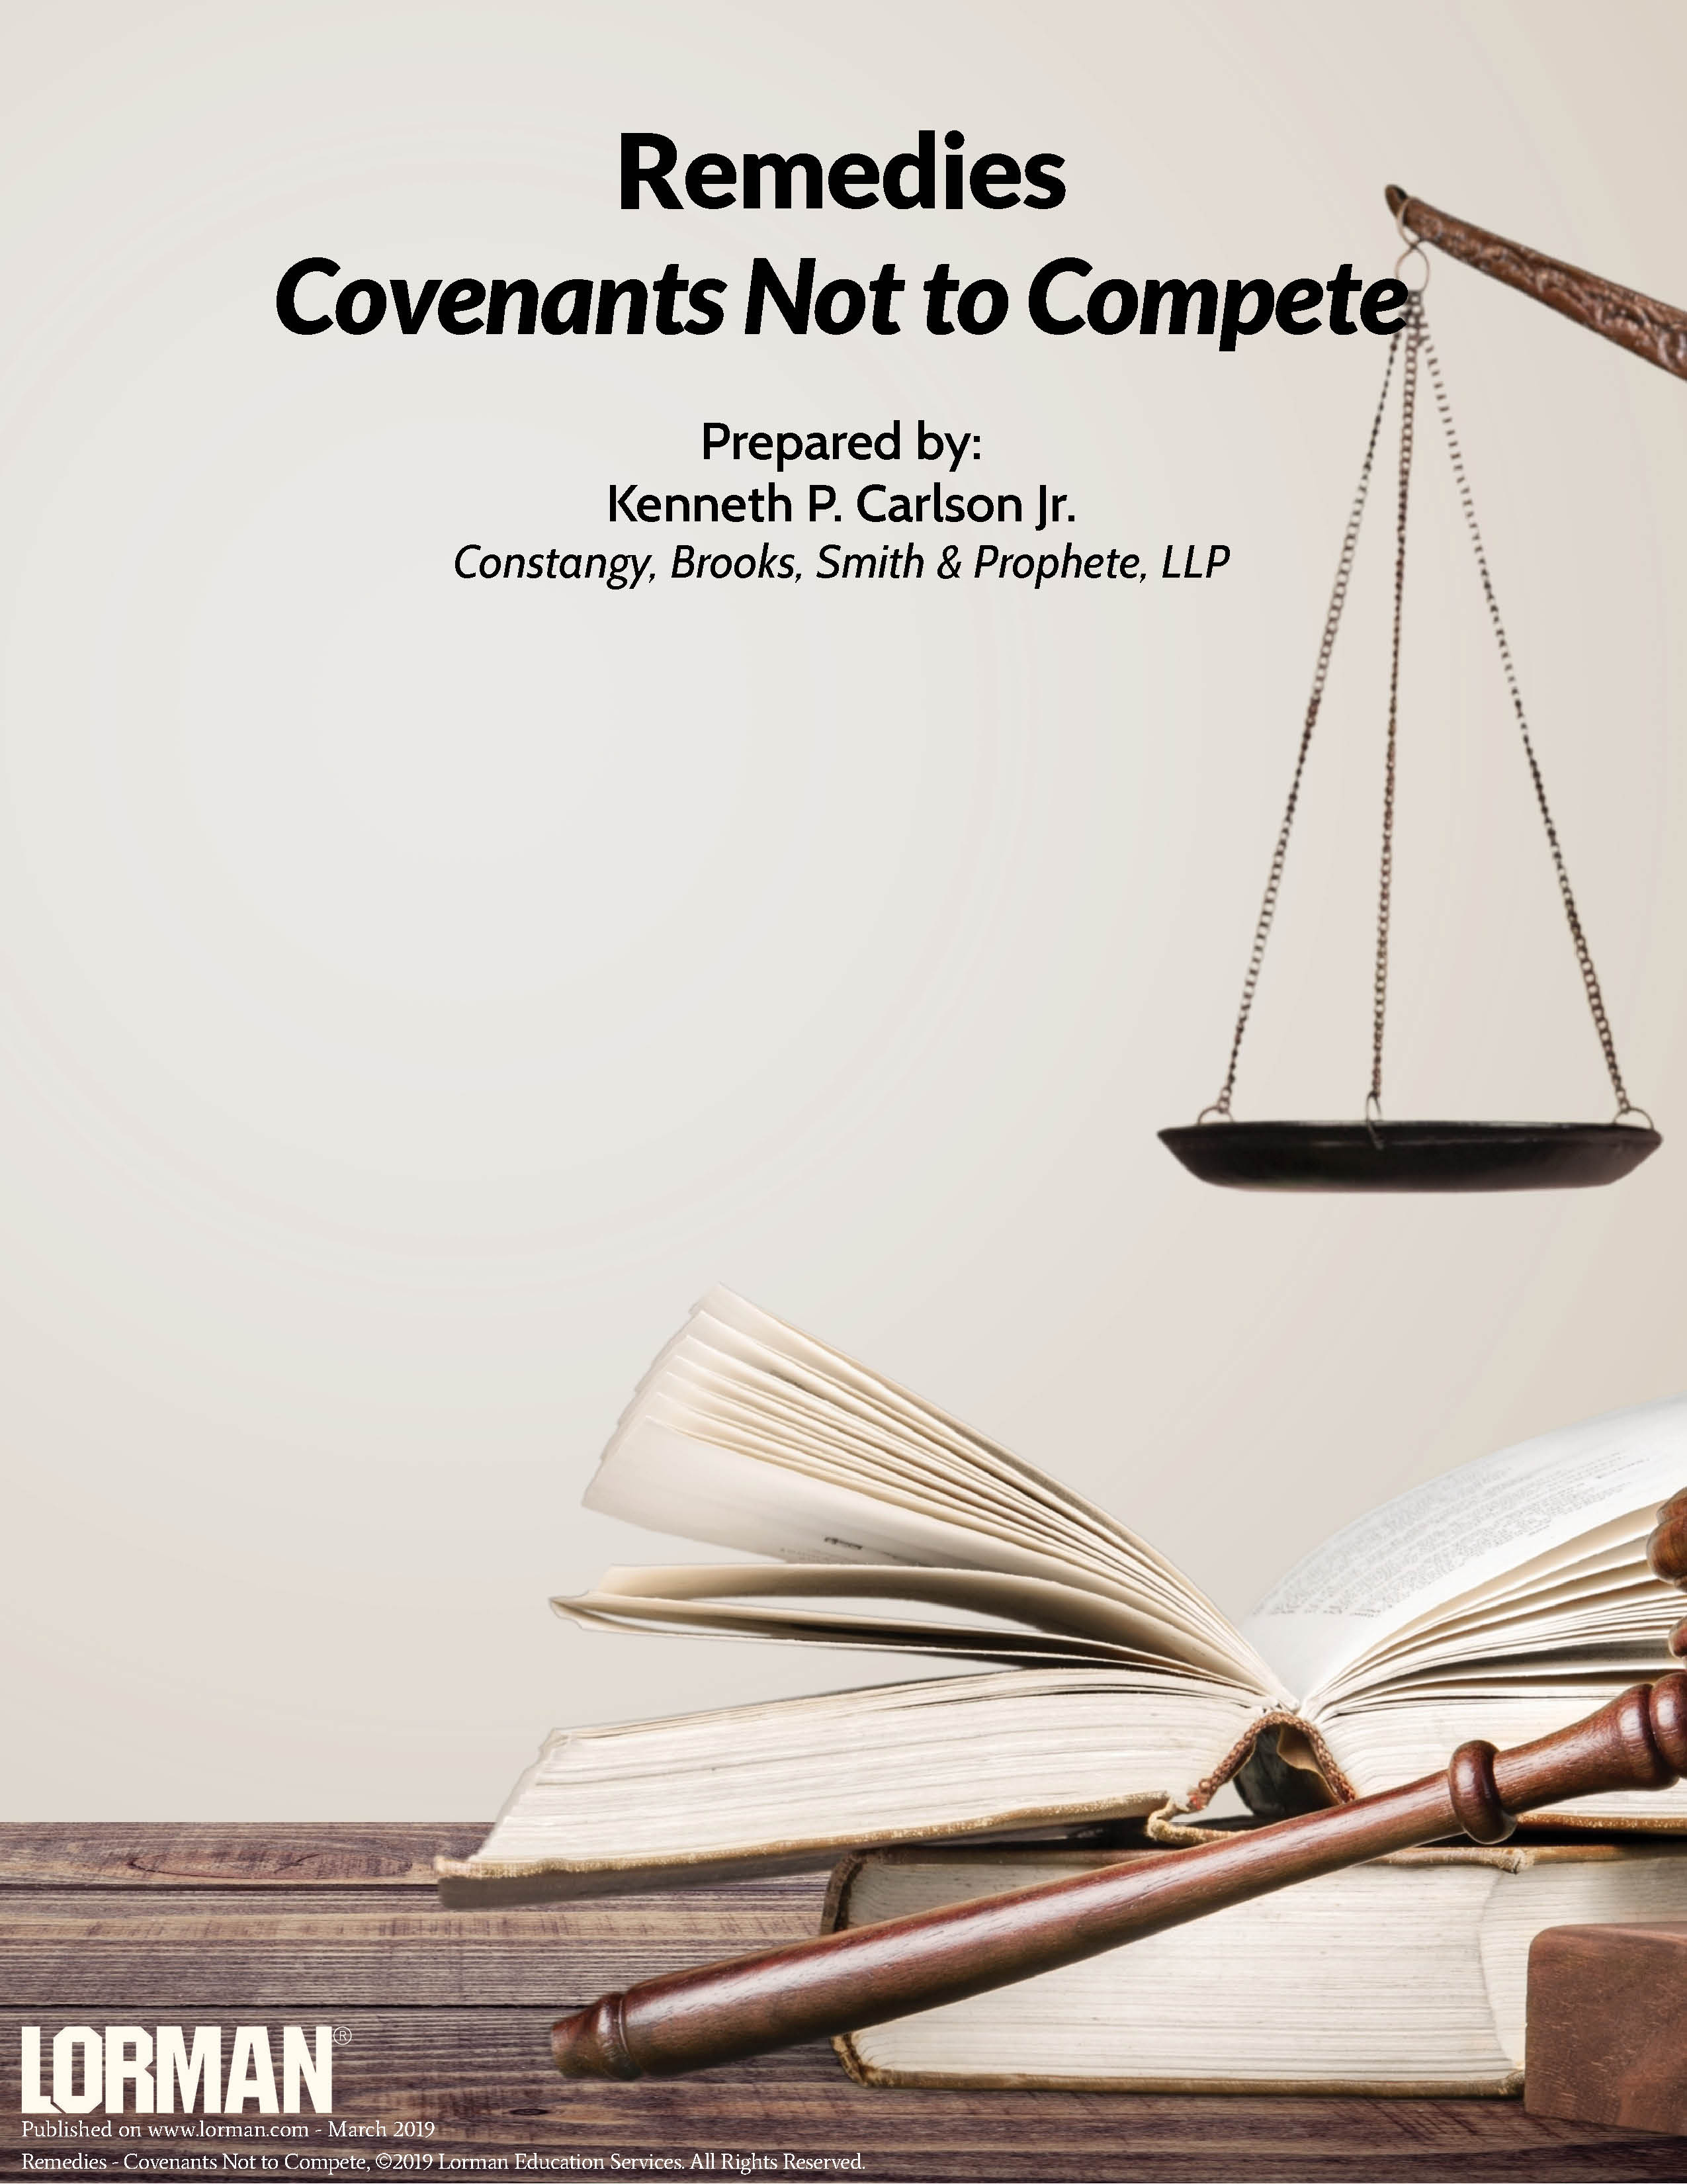 Remedies - Covenants Not to Compete